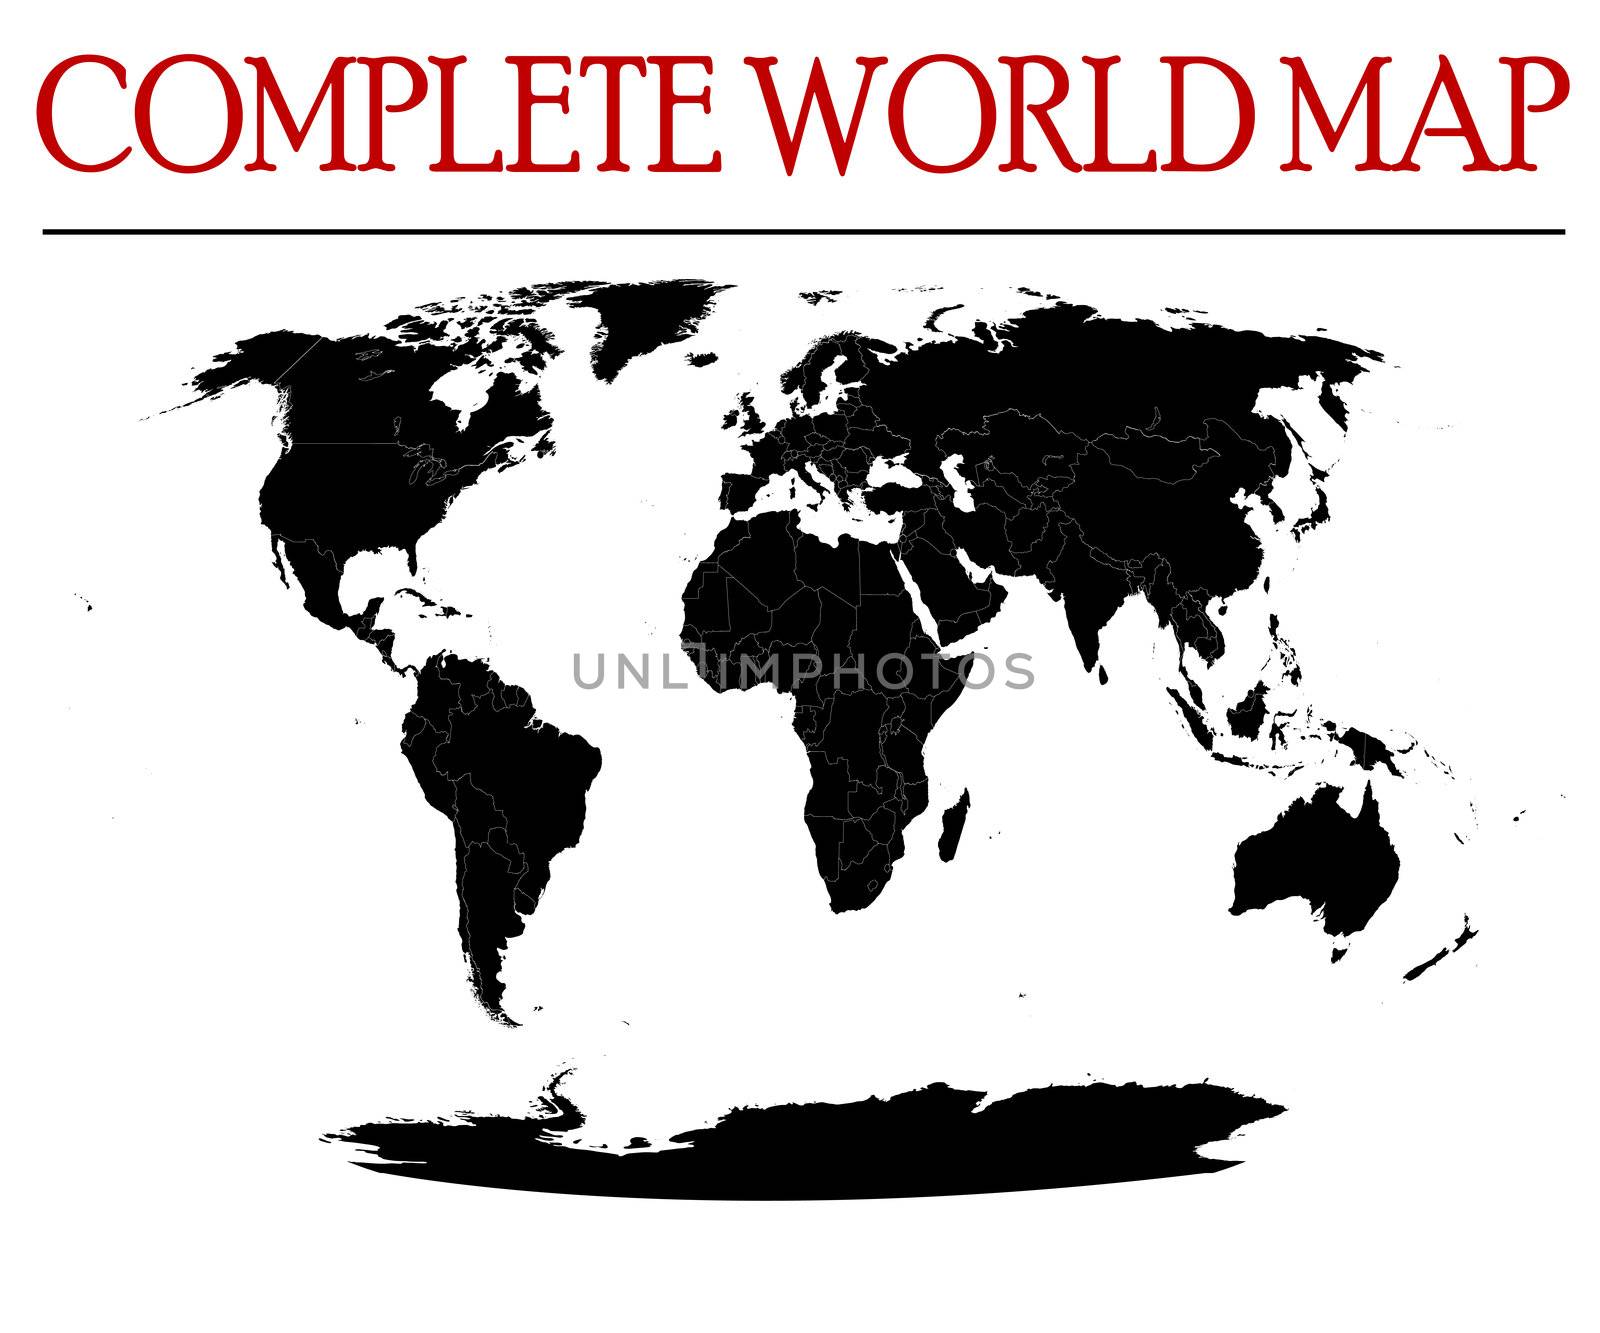 complete world map by Lirch